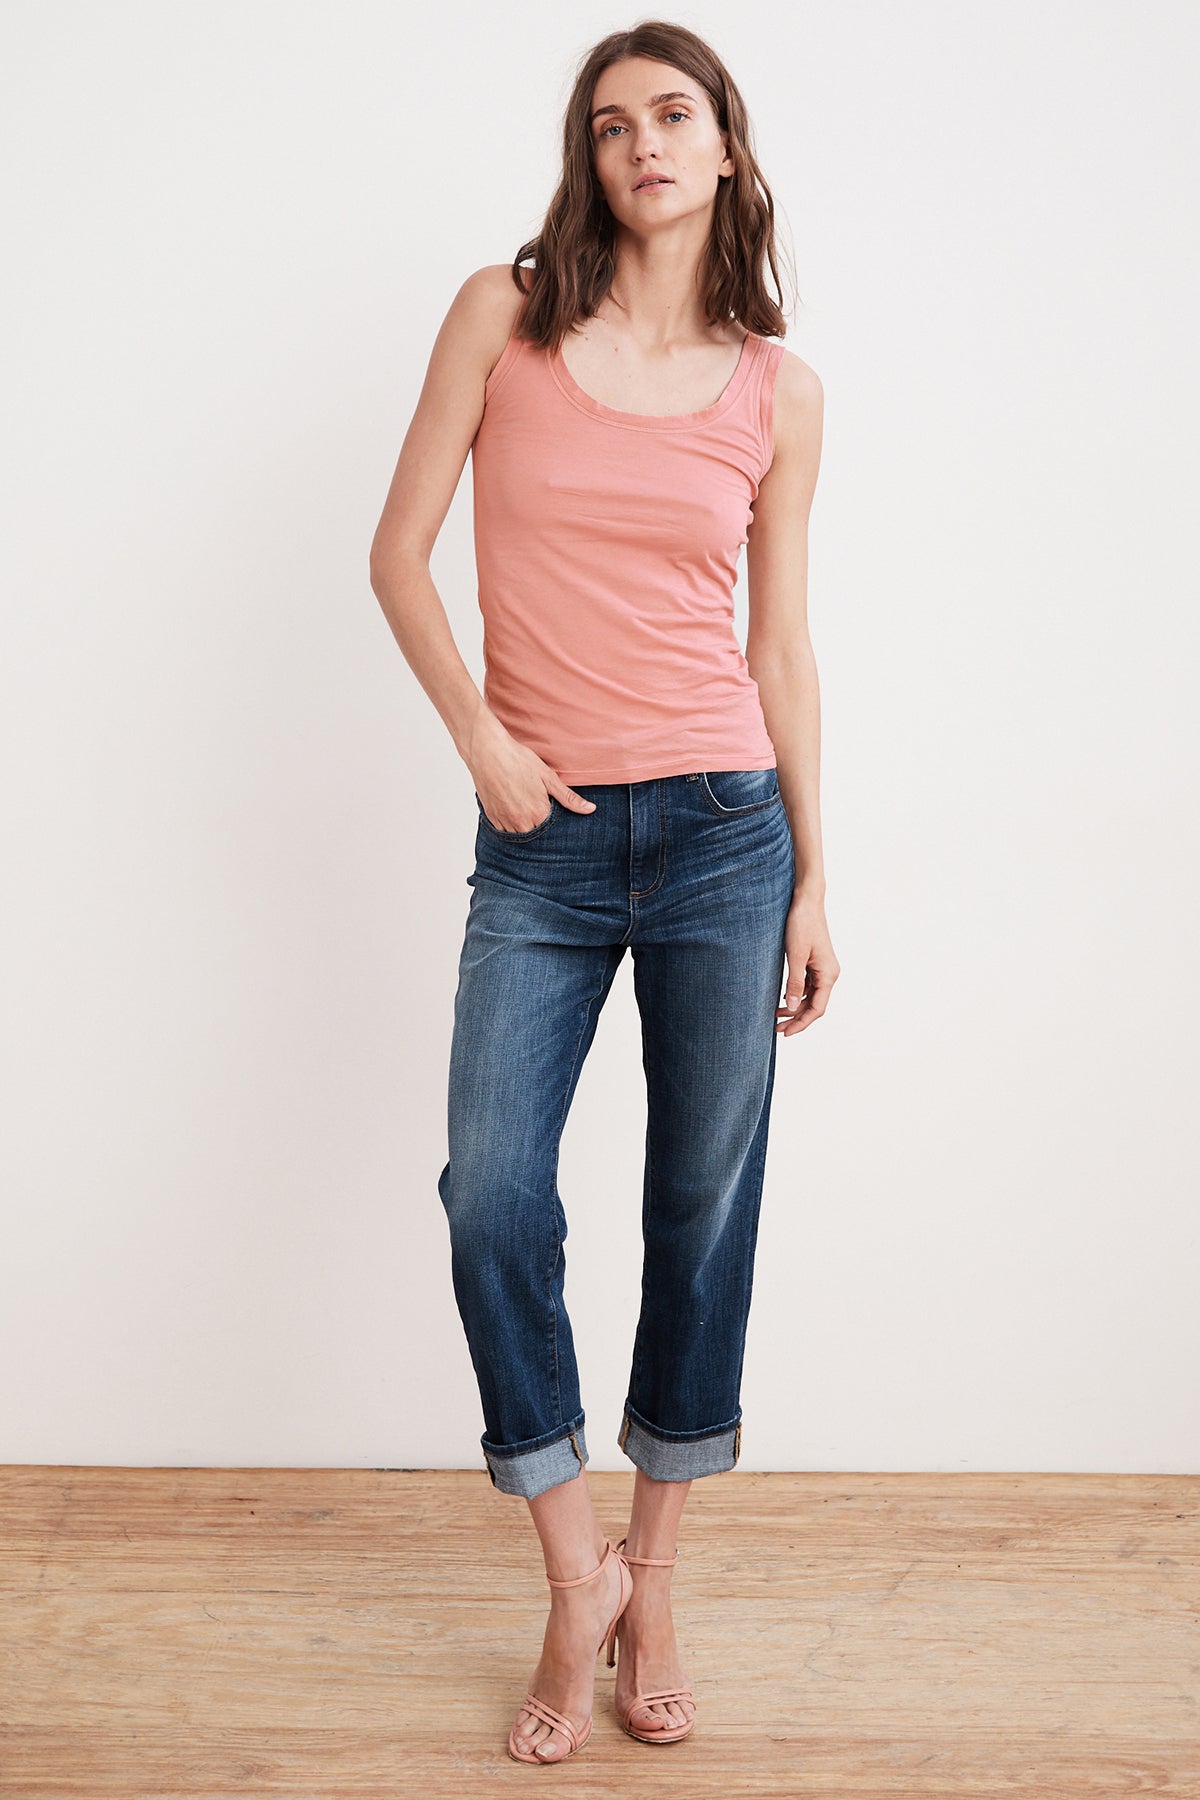 A woman wearing a MOSSY GAUZY WHISPER FITTED TANK in pink from Velvet by Graham & Spencer. Additionally, she is wearing jeans.-1675916509265